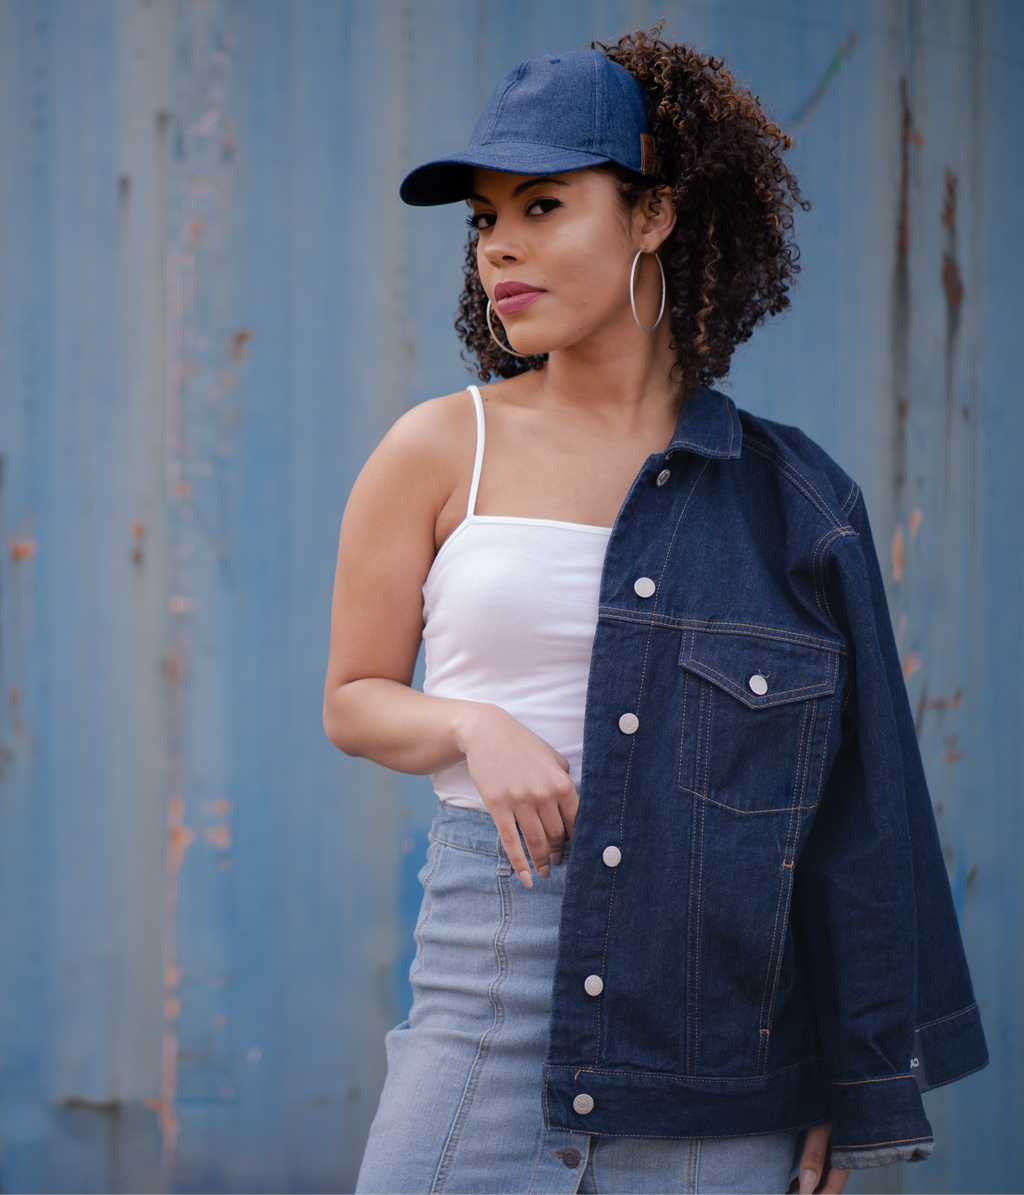 Denim Satin lined culture cap on curly hair woman